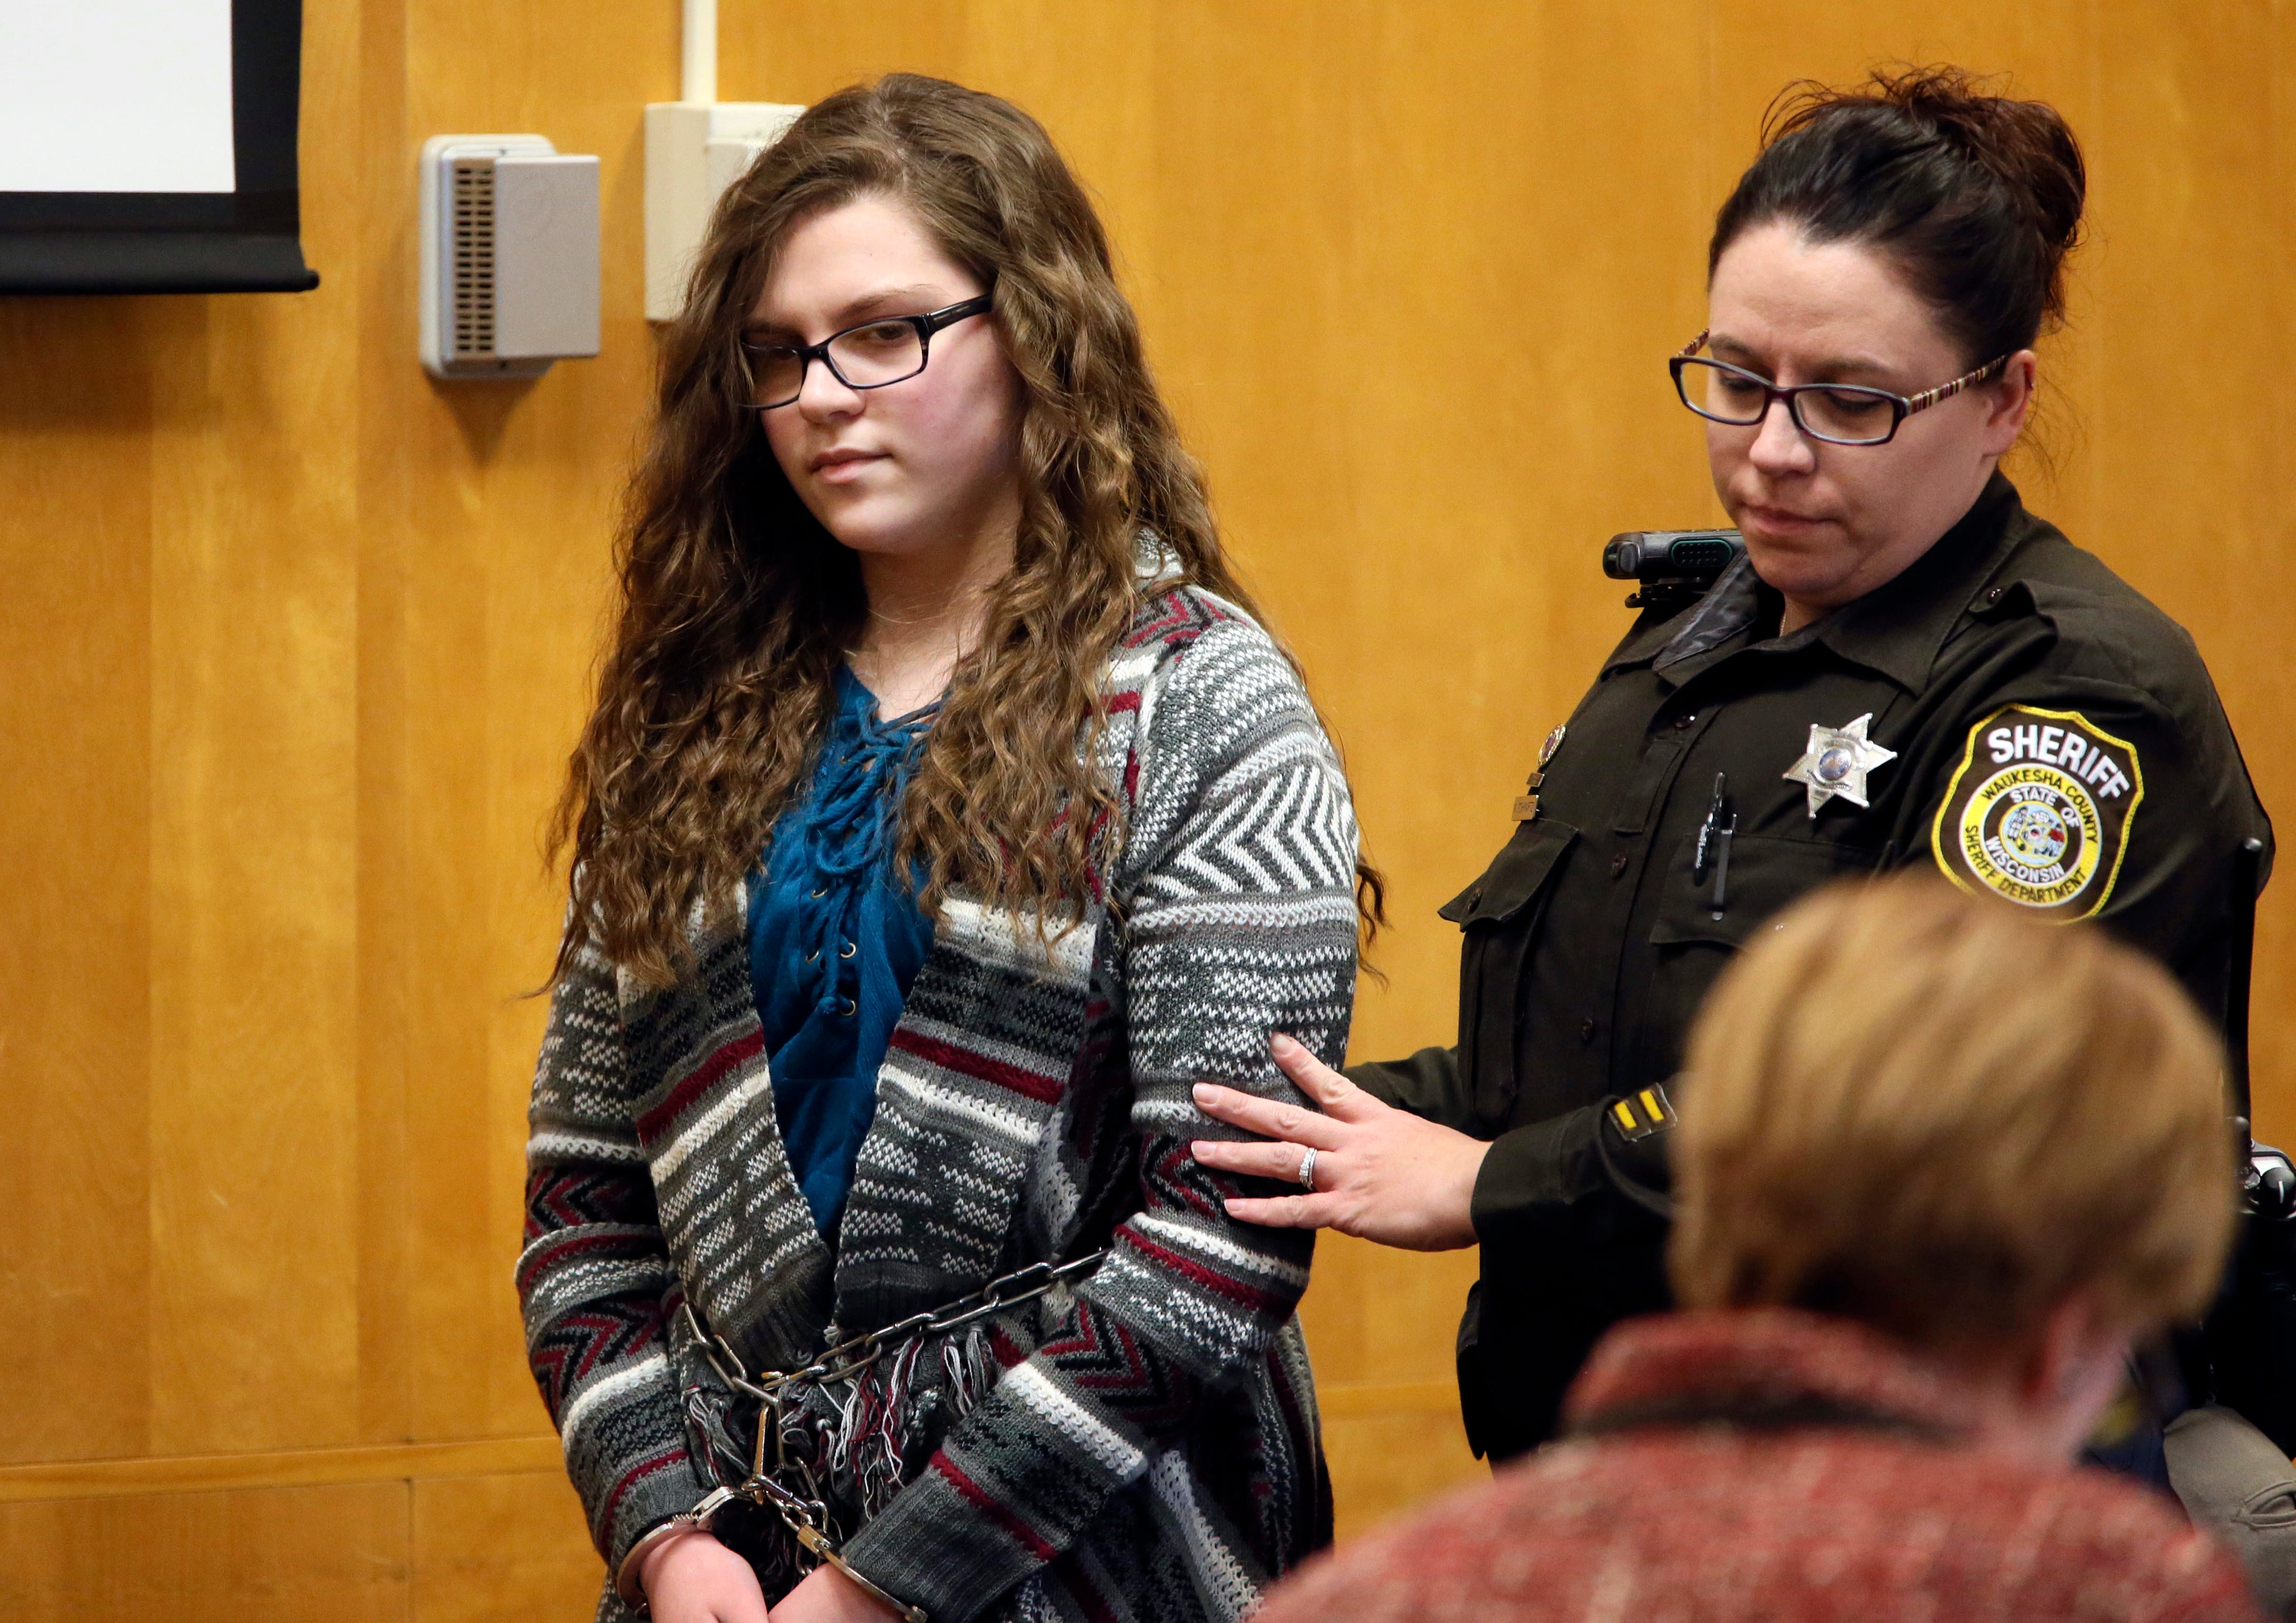 Anissa Weier, 19, was sentenced in 2017 to 25 years in a mental health insitution for the Slenderman-inspired stabbing